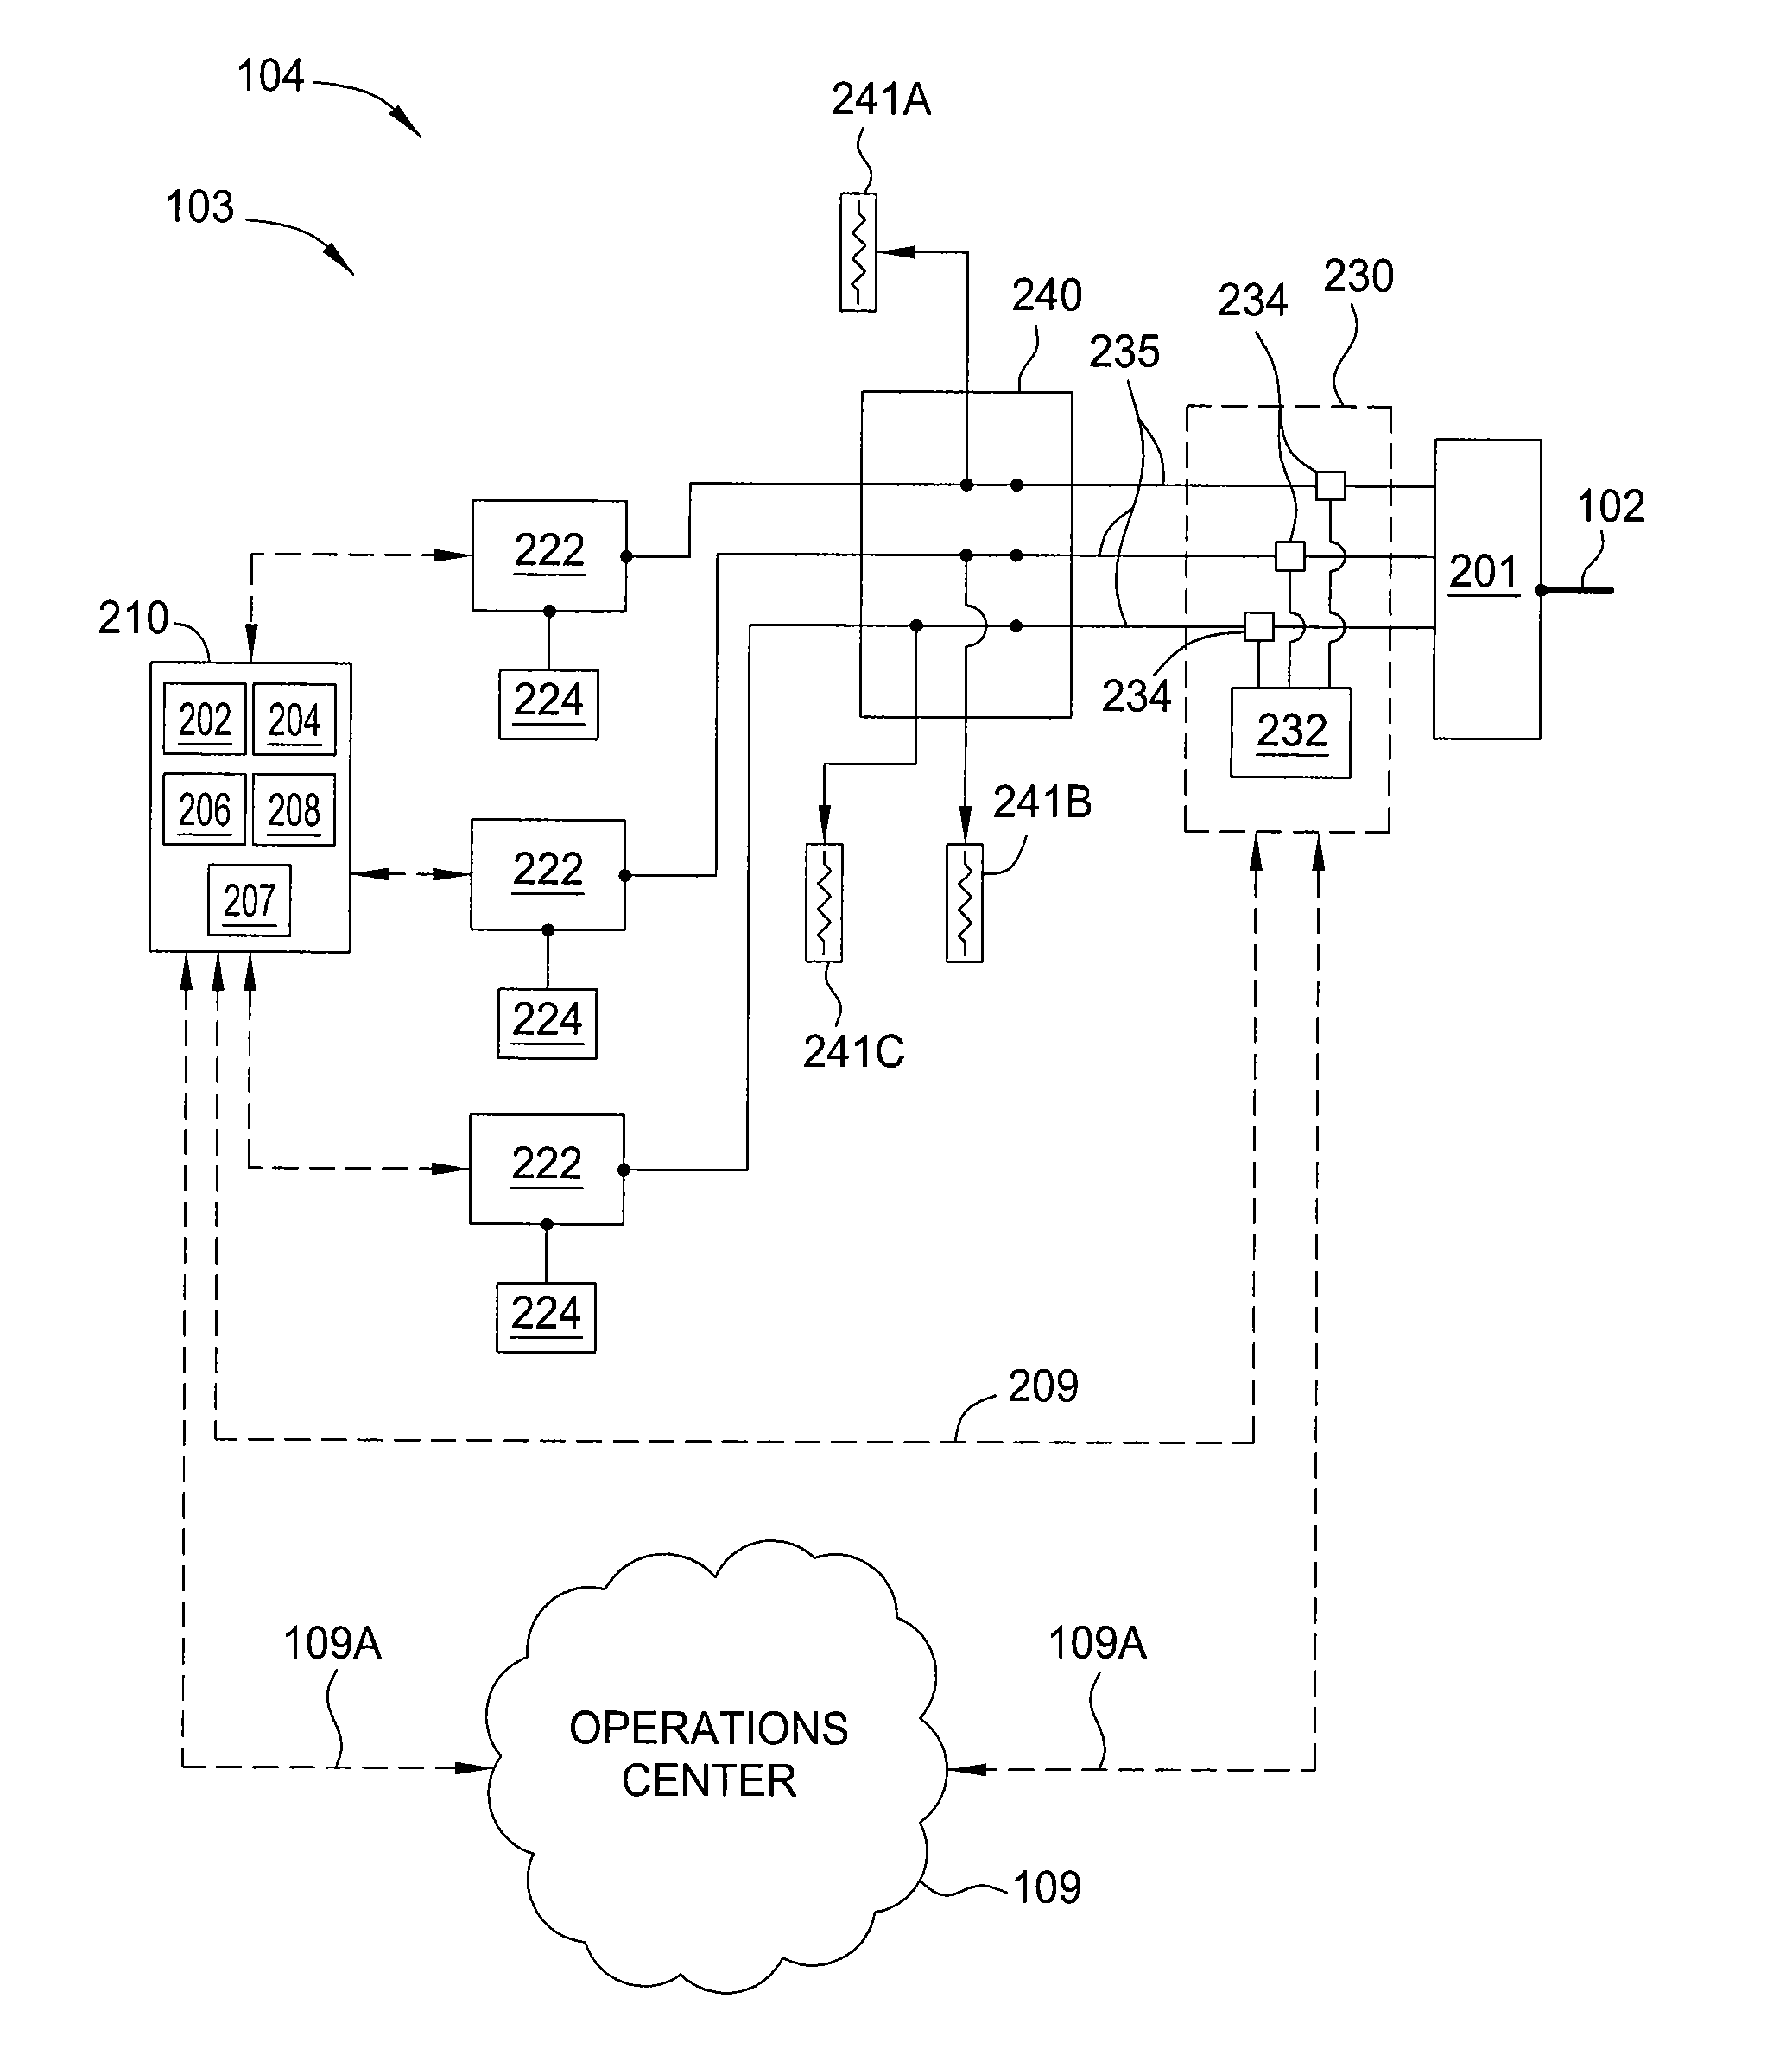 System for optimizing the charging of electric vehicles using networked distributed energy storage systems